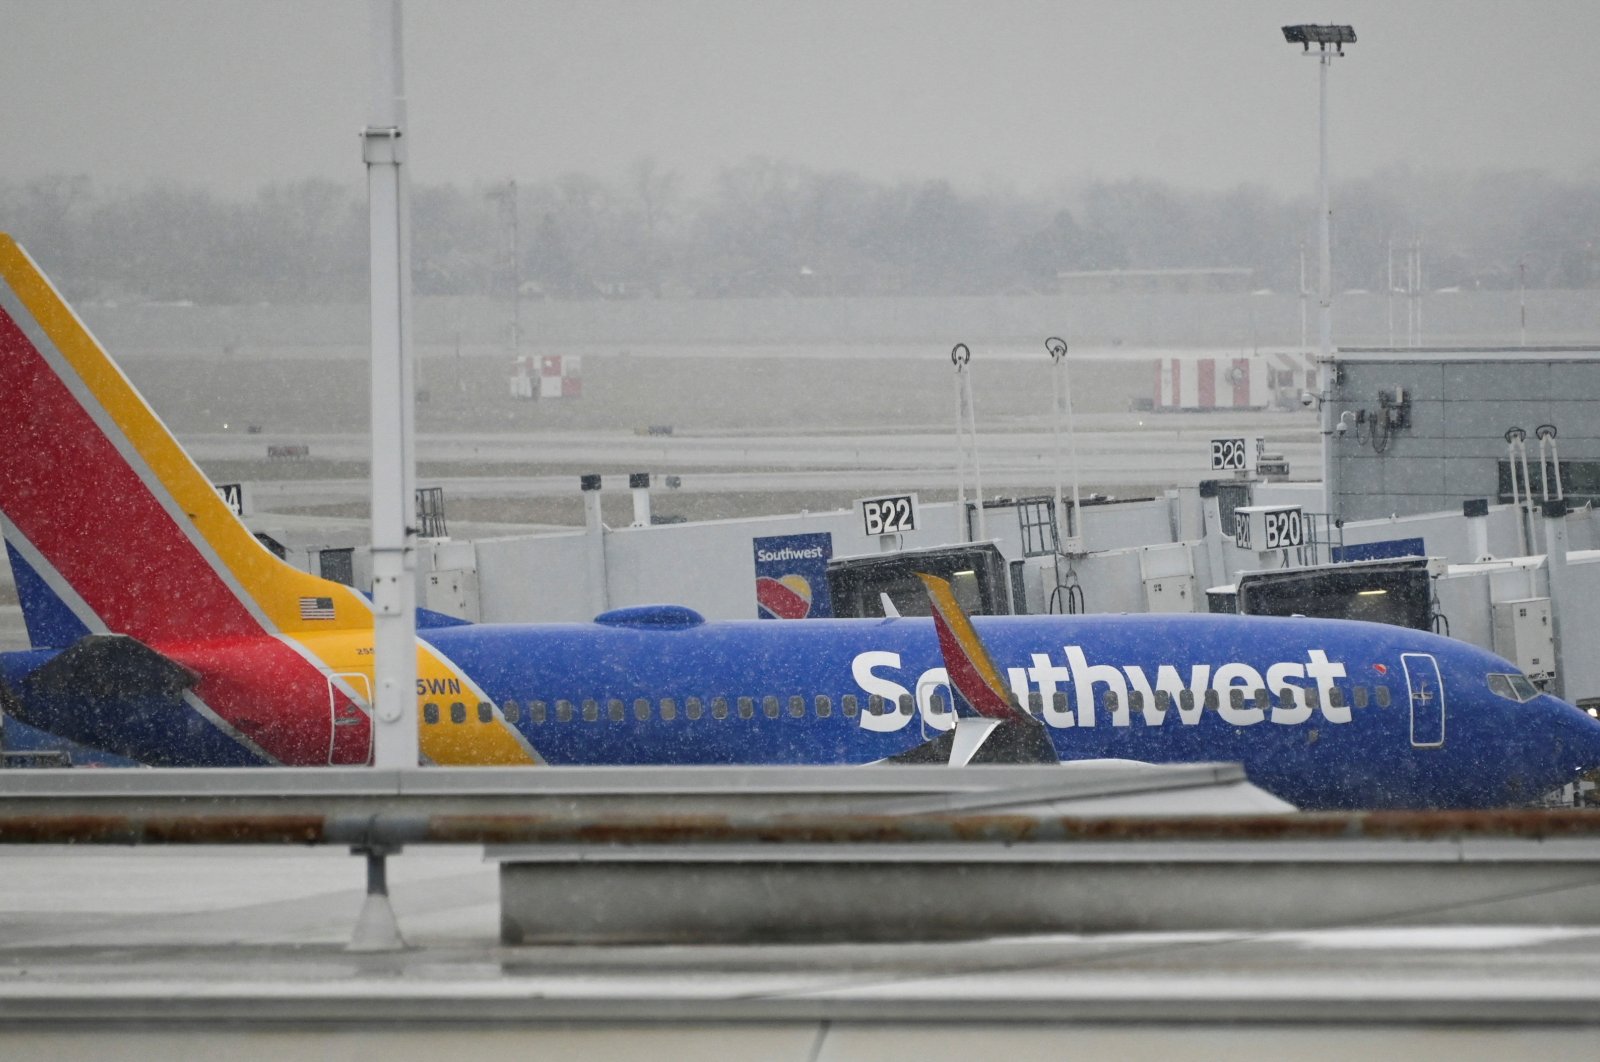 A plane sits on the airfield as flight cancellations mount during a cold weather front as a weather phenomenon known as a bomb cyclone hits the Upper Midwest, at Midway International Airport in Chicago, Illinois, U.S., Dec. 22, 2022. (Reuters Photo)